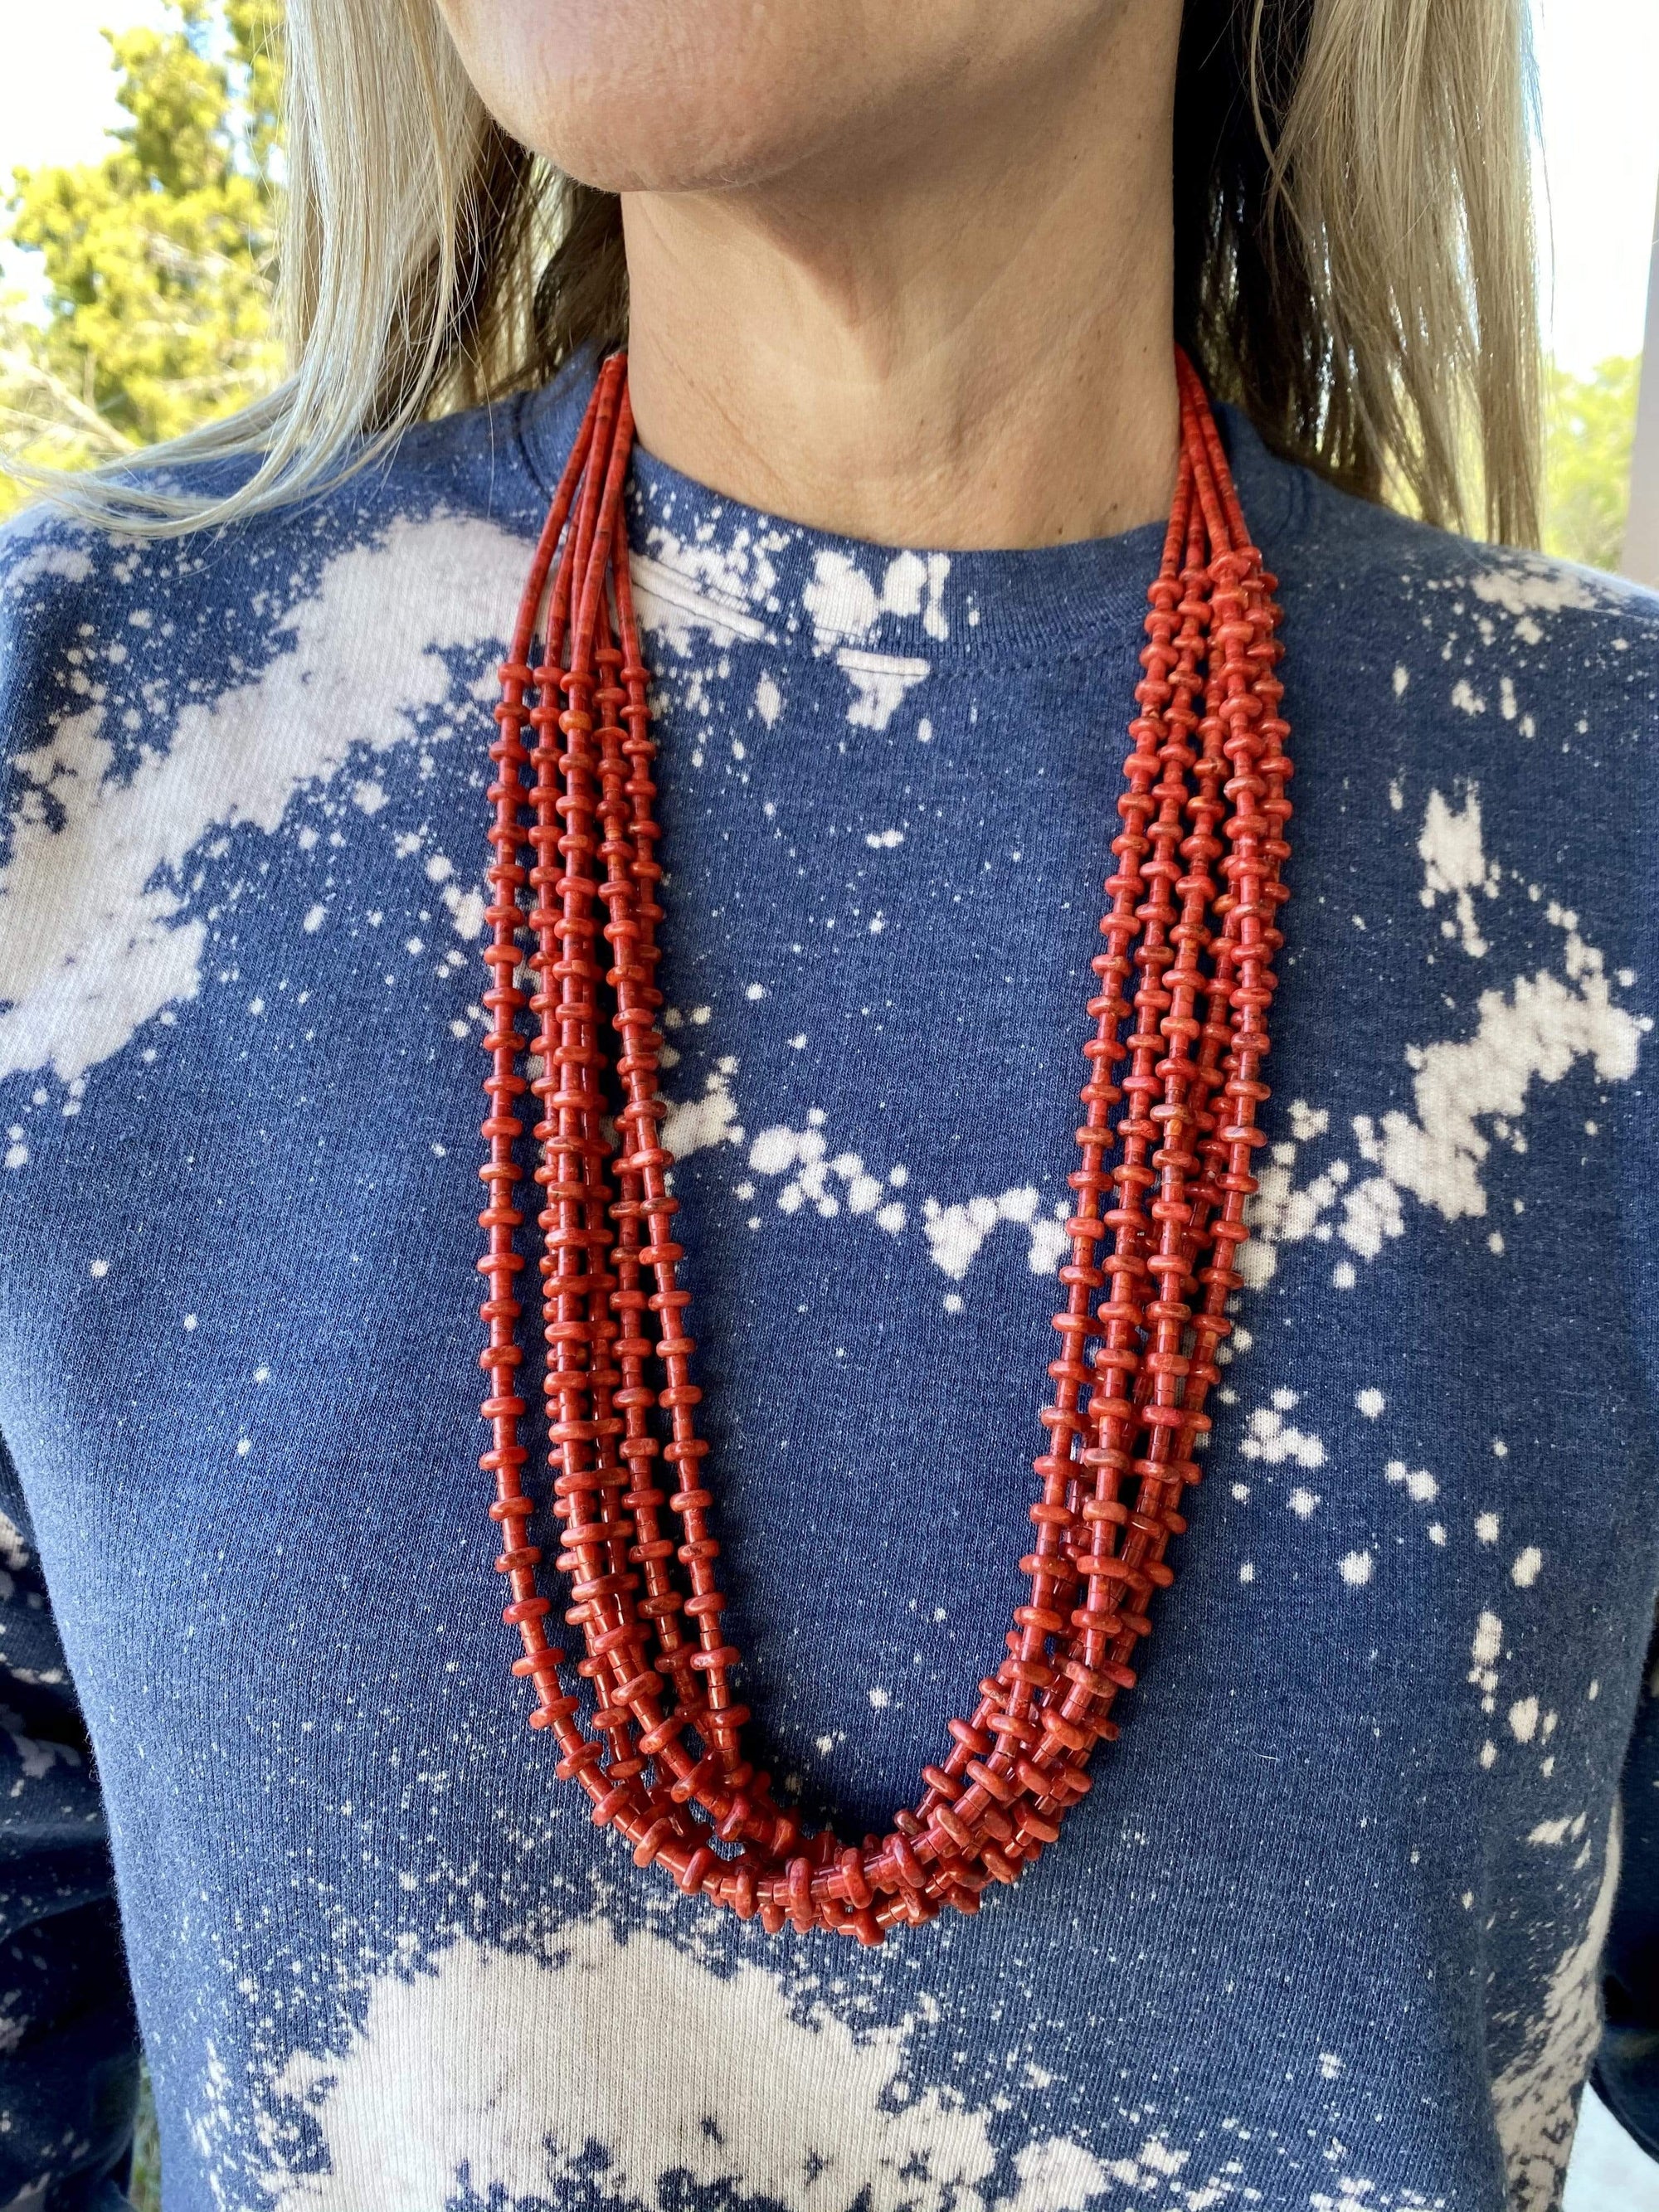 Accessorize In Style Sterling Necklaces Sponge Coral 6 Strand Necklace Set